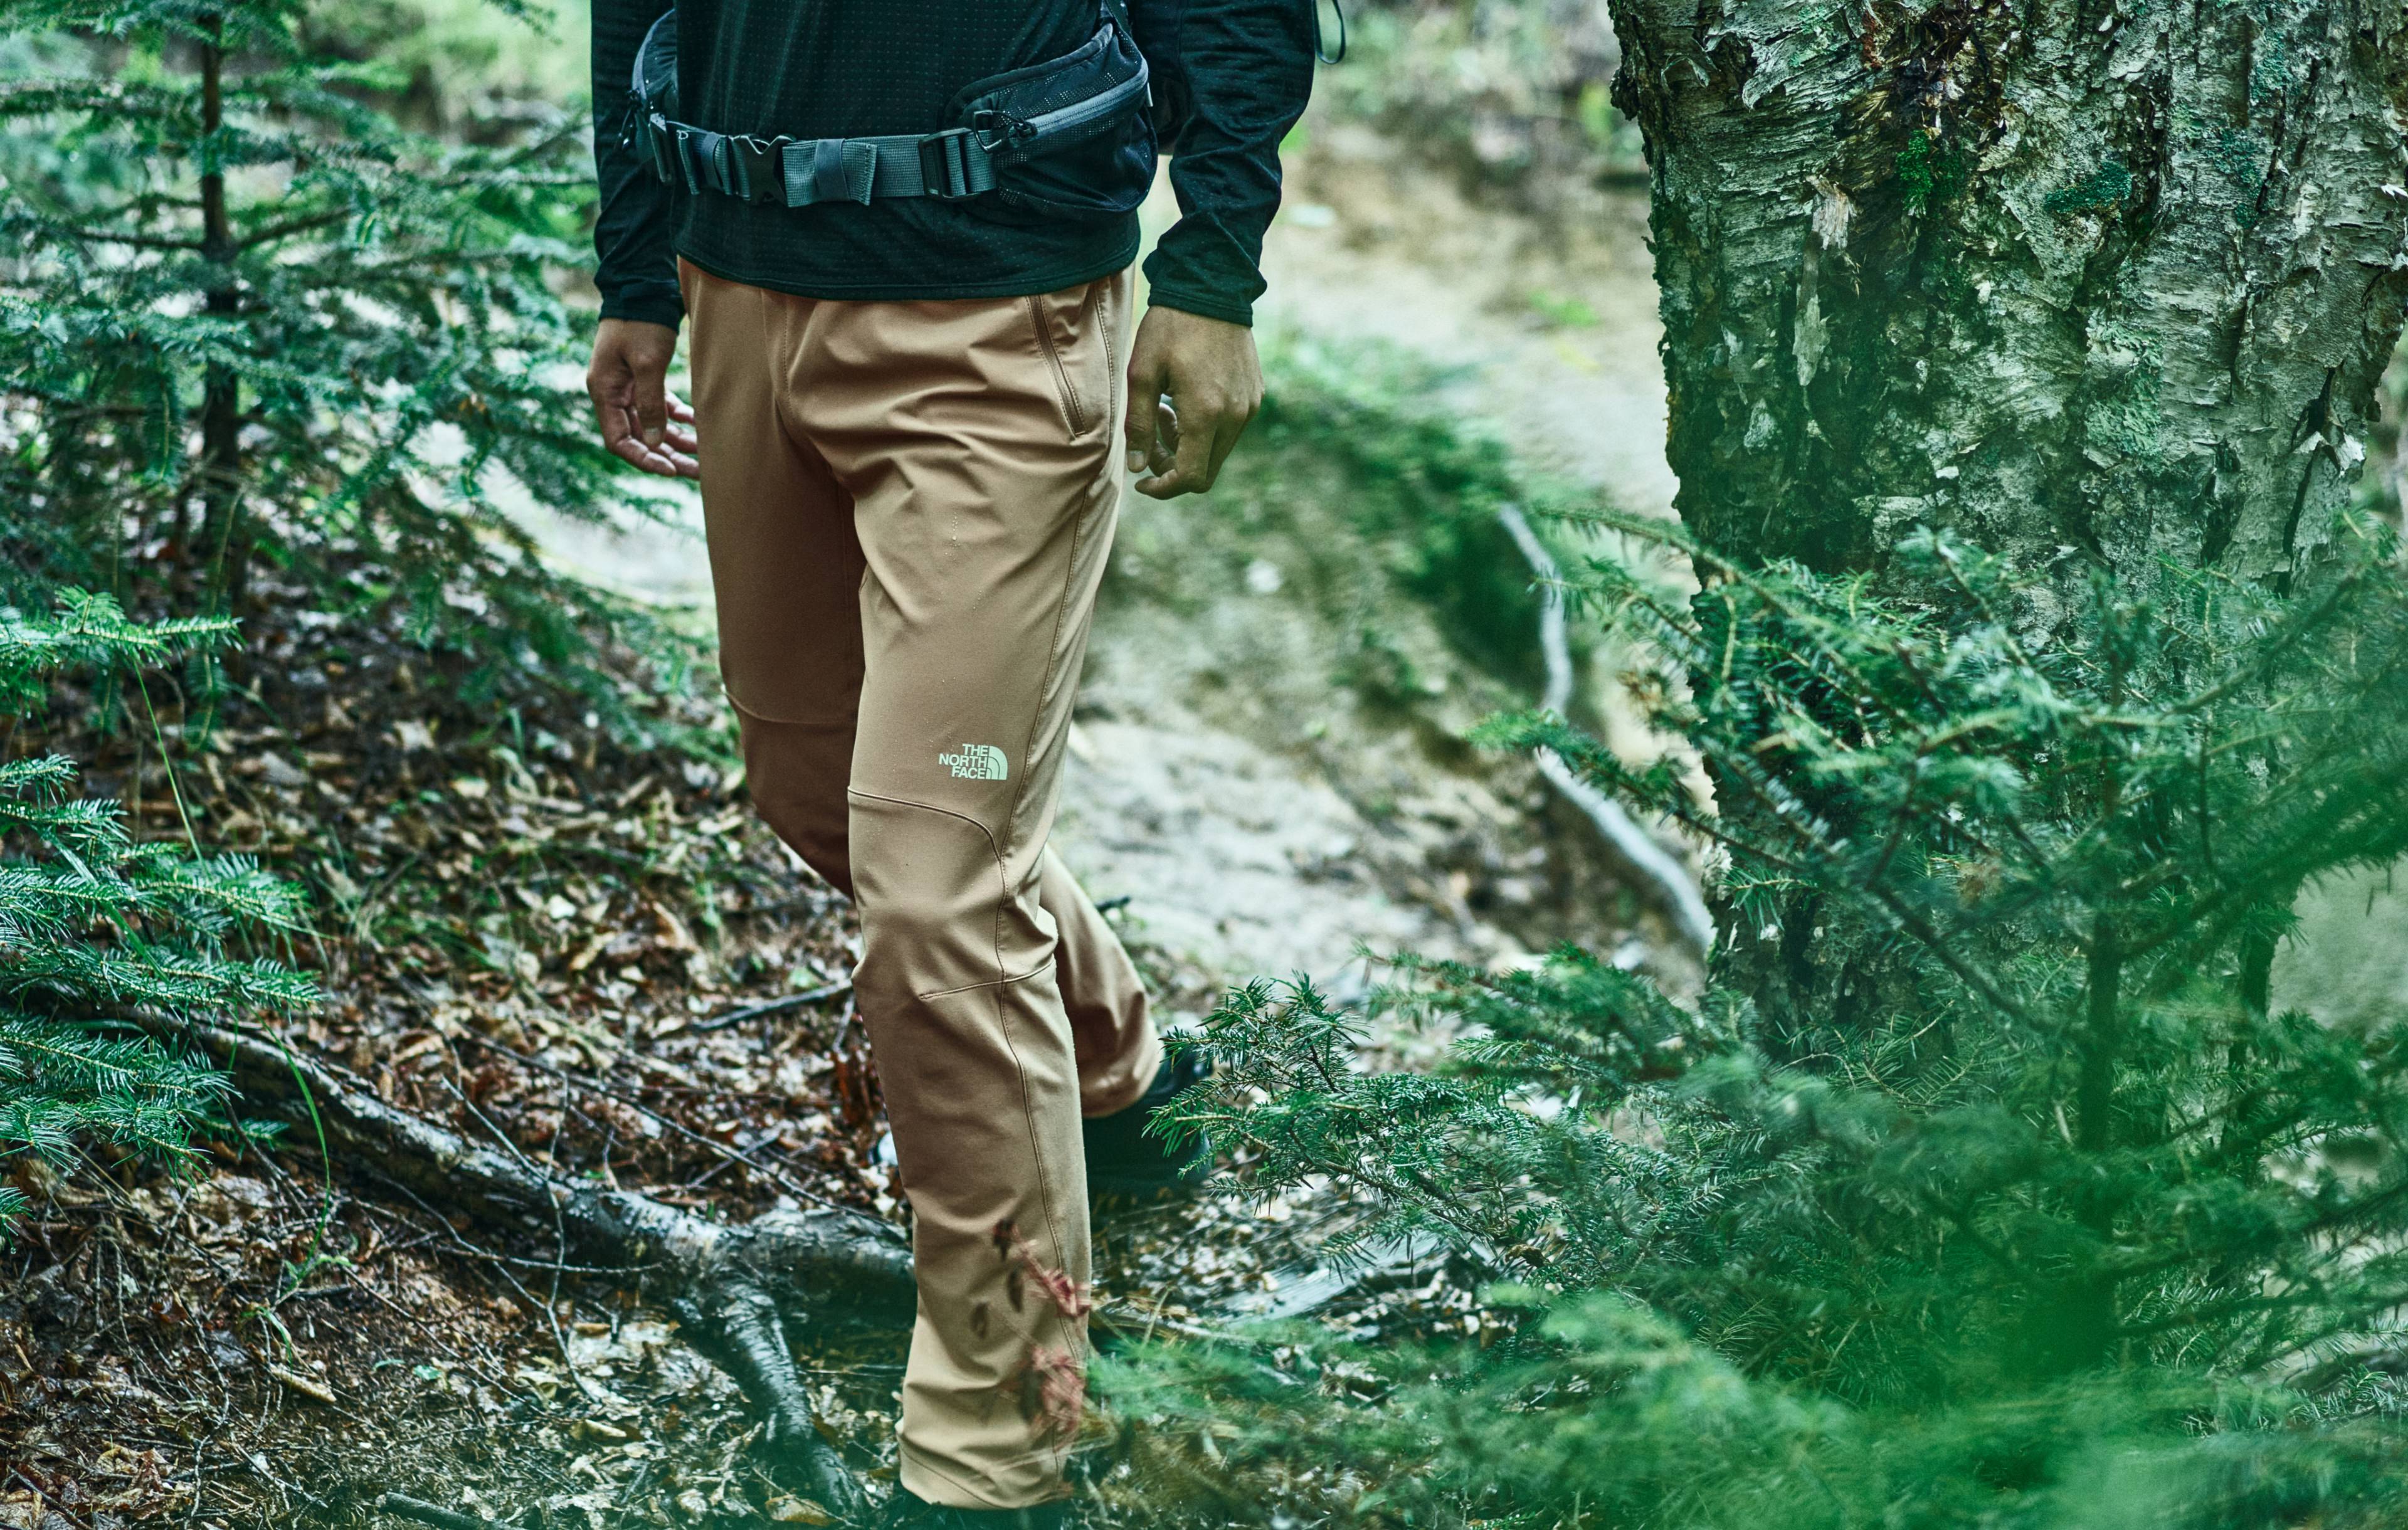 ALPINE LIGHT PANT (NB32301) - THE NORTH FACE MOUNTAIN